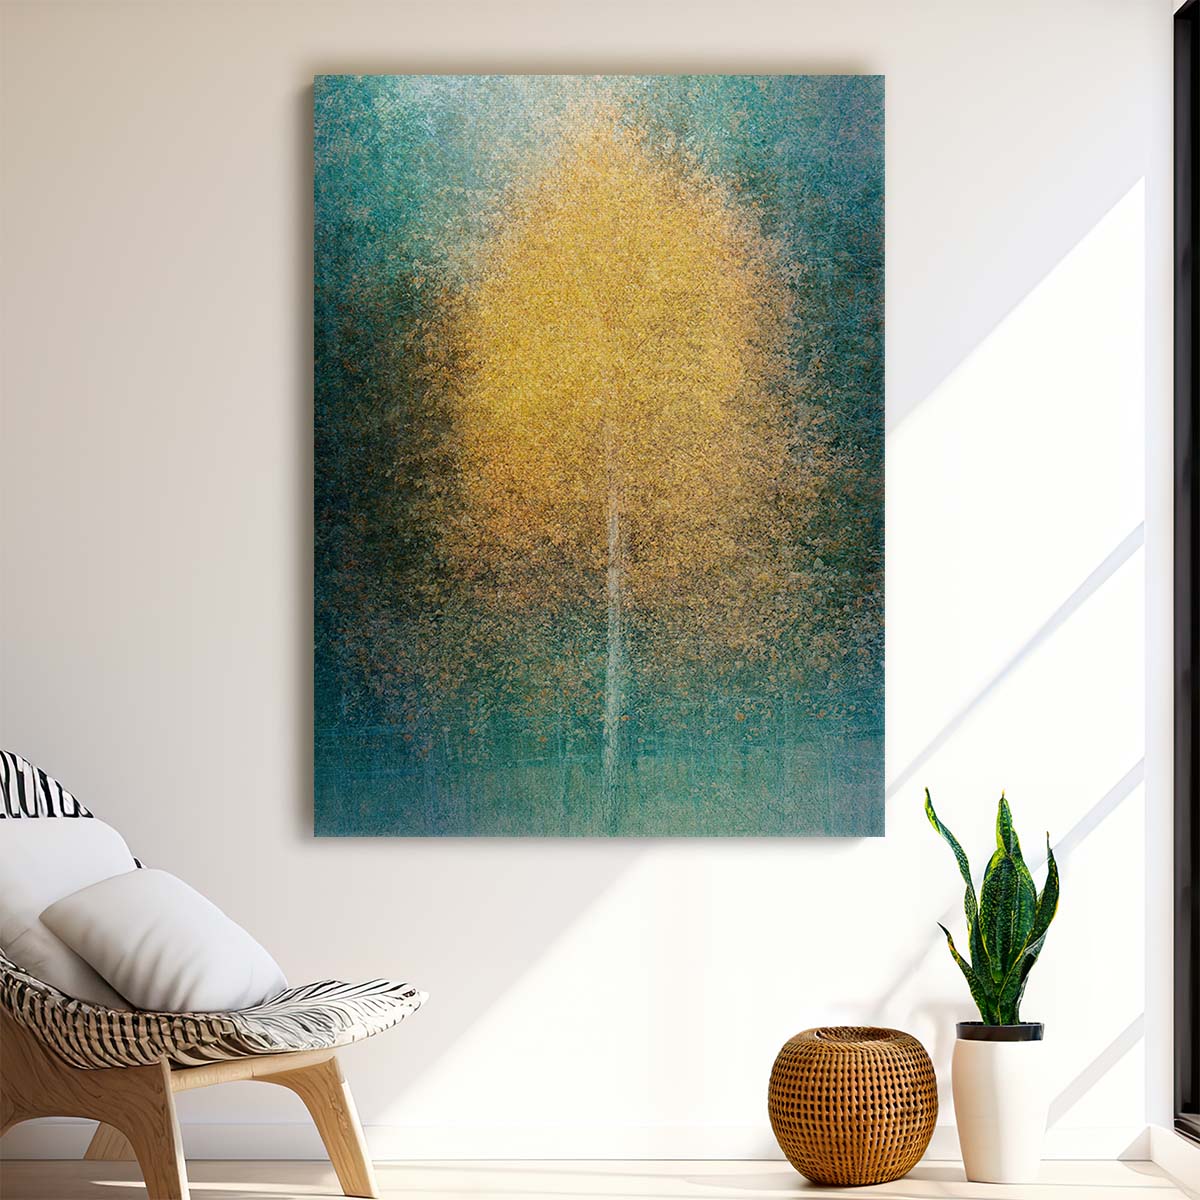 Autumn Forest Landscape Photography - Lonely Yellow Tree in Sweden by Luxuriance Designs, made in USA